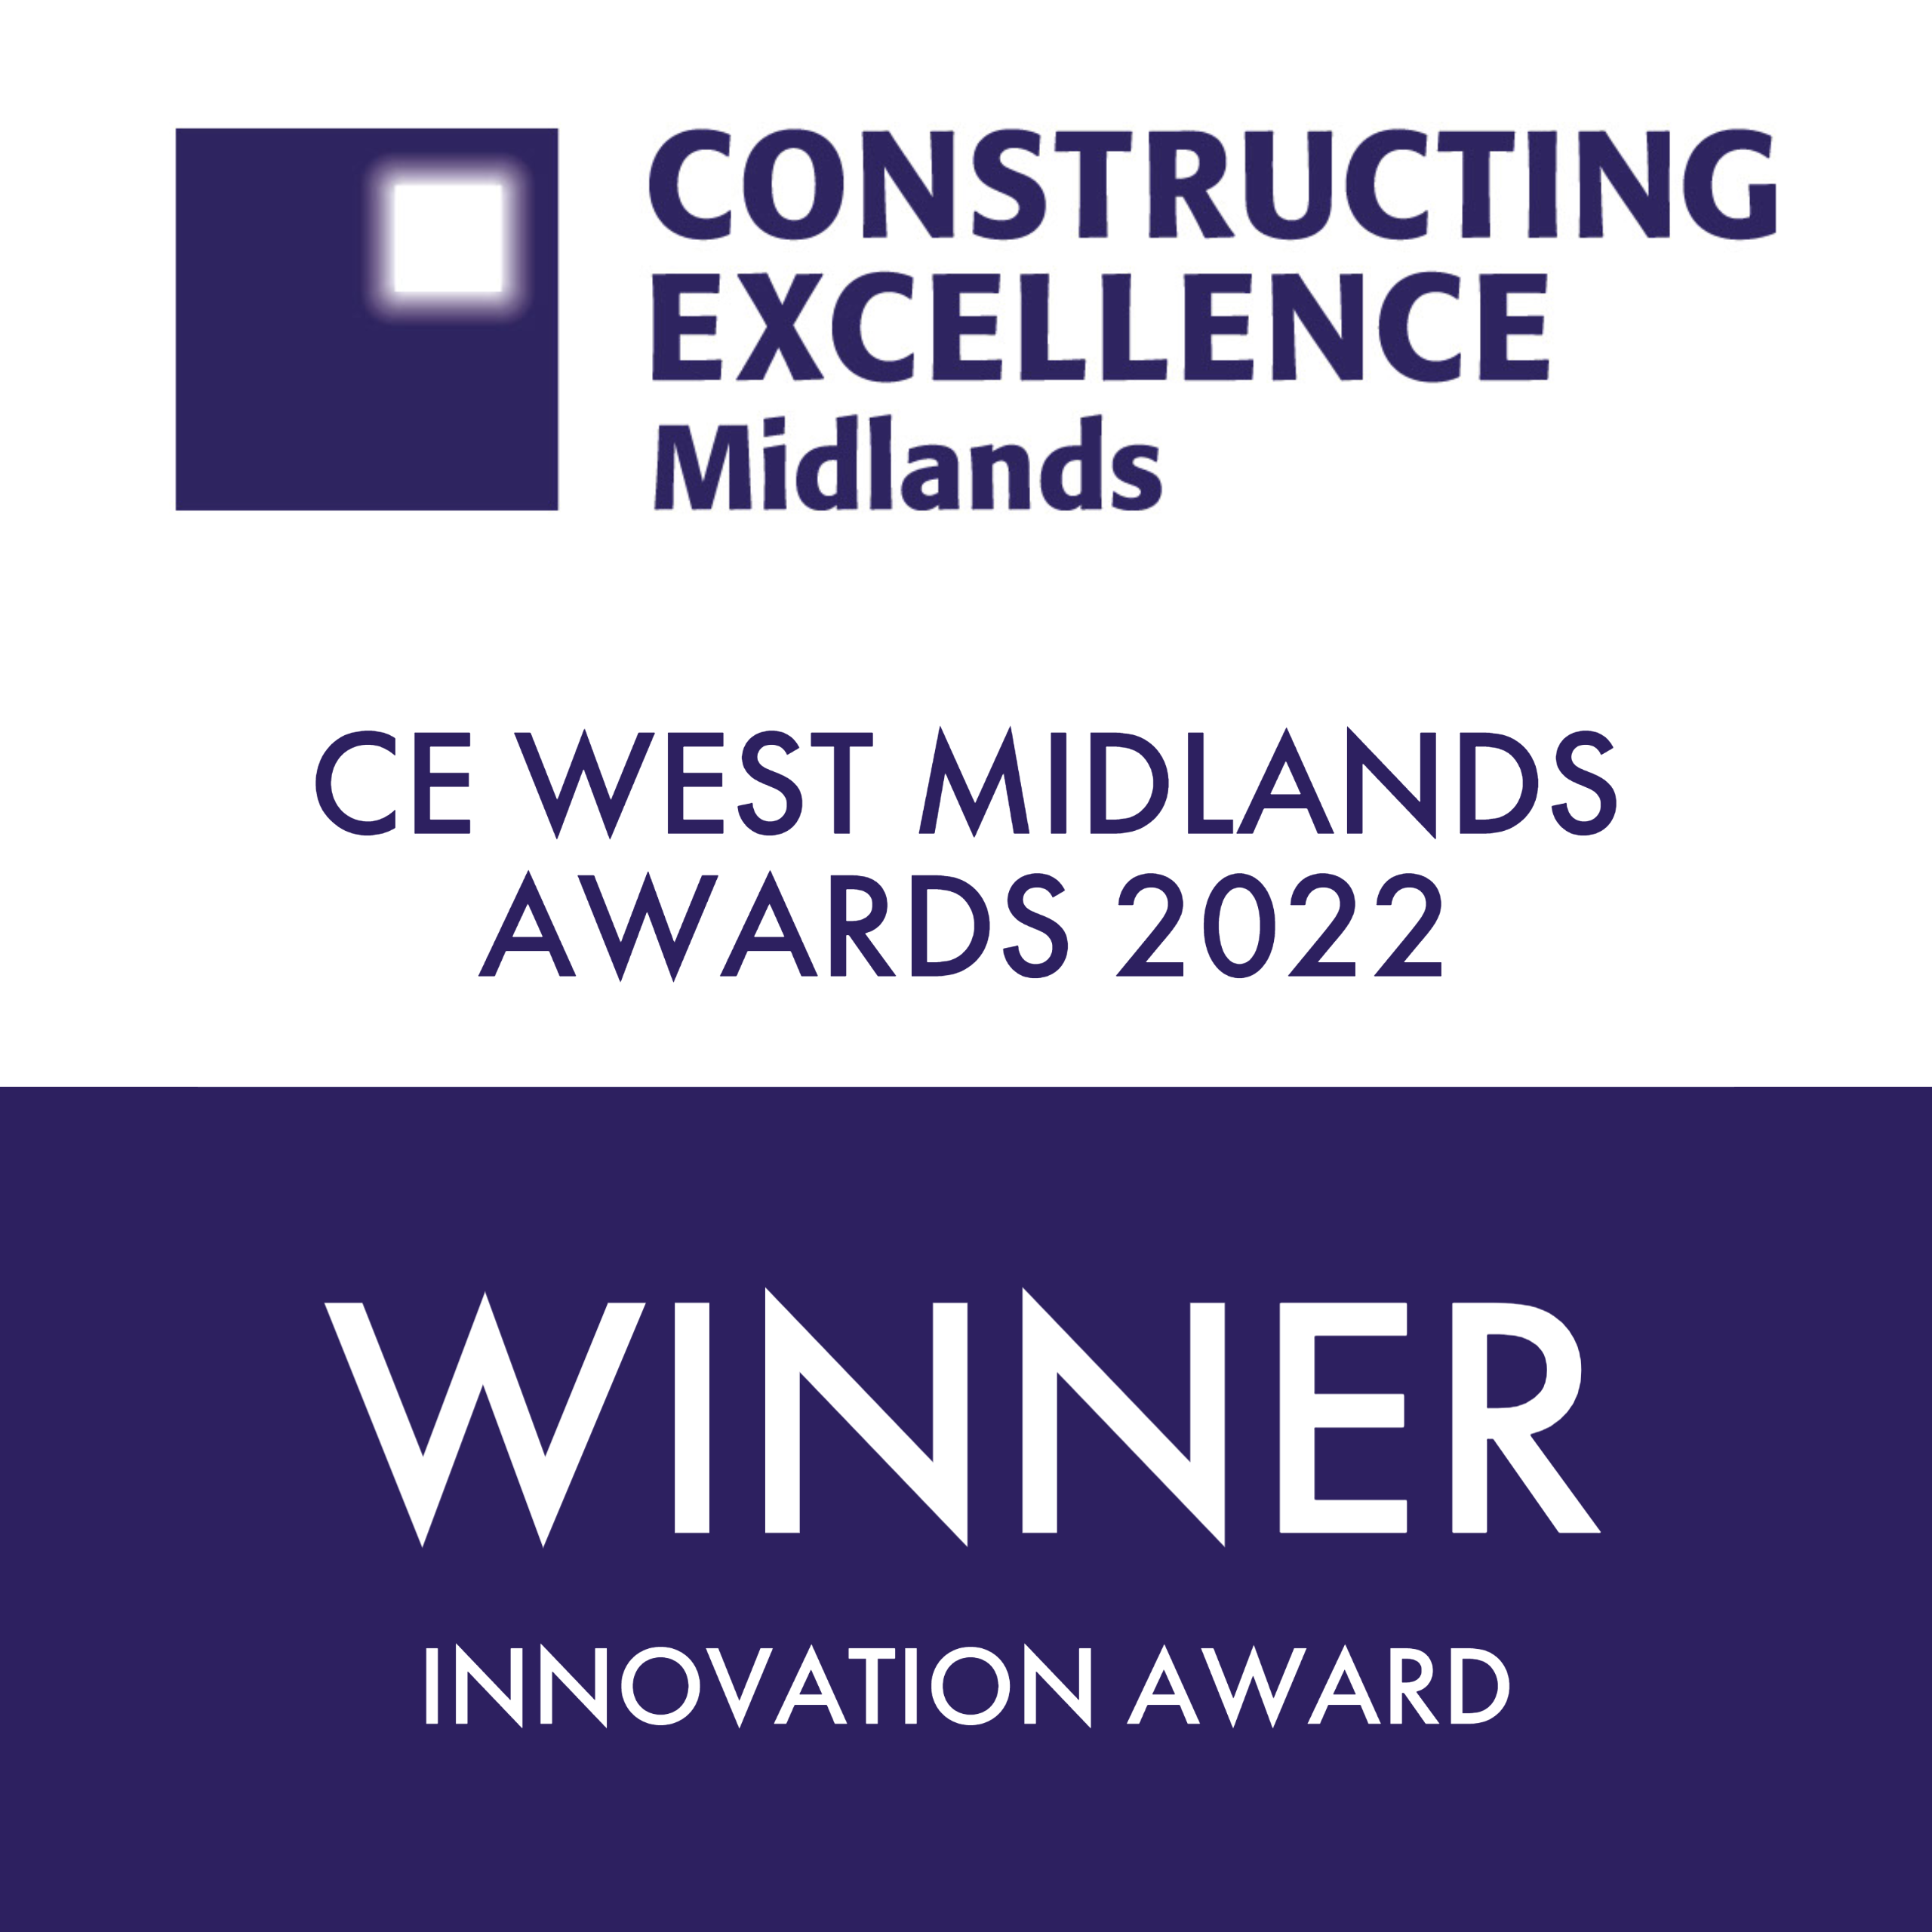 Constructing Excellence